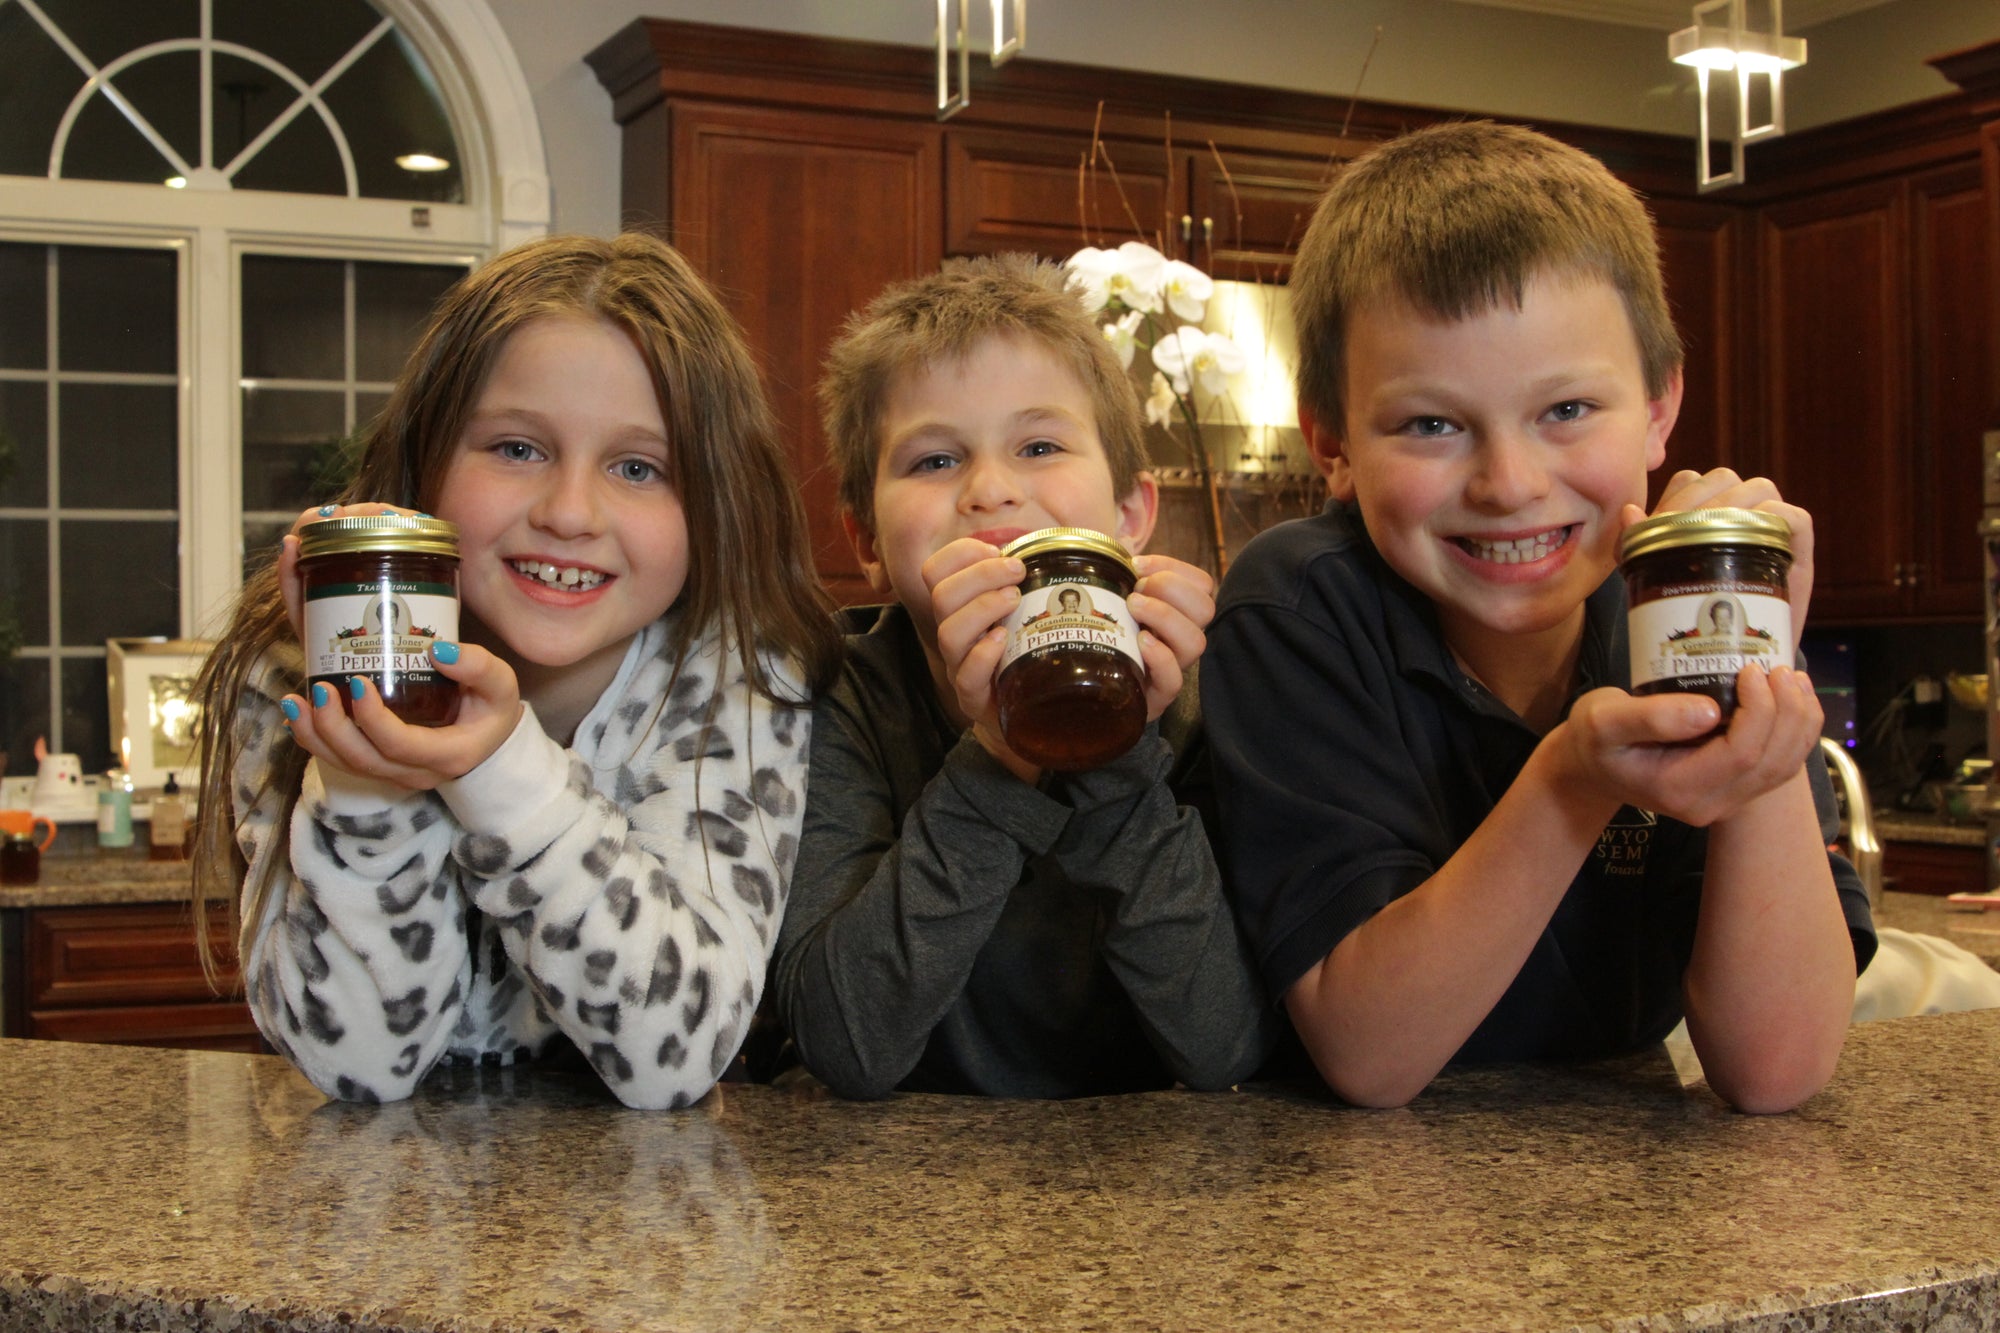 Kid-Friendly Pepper Jelly: Introducing the Flavors and Heat to the Next Generation